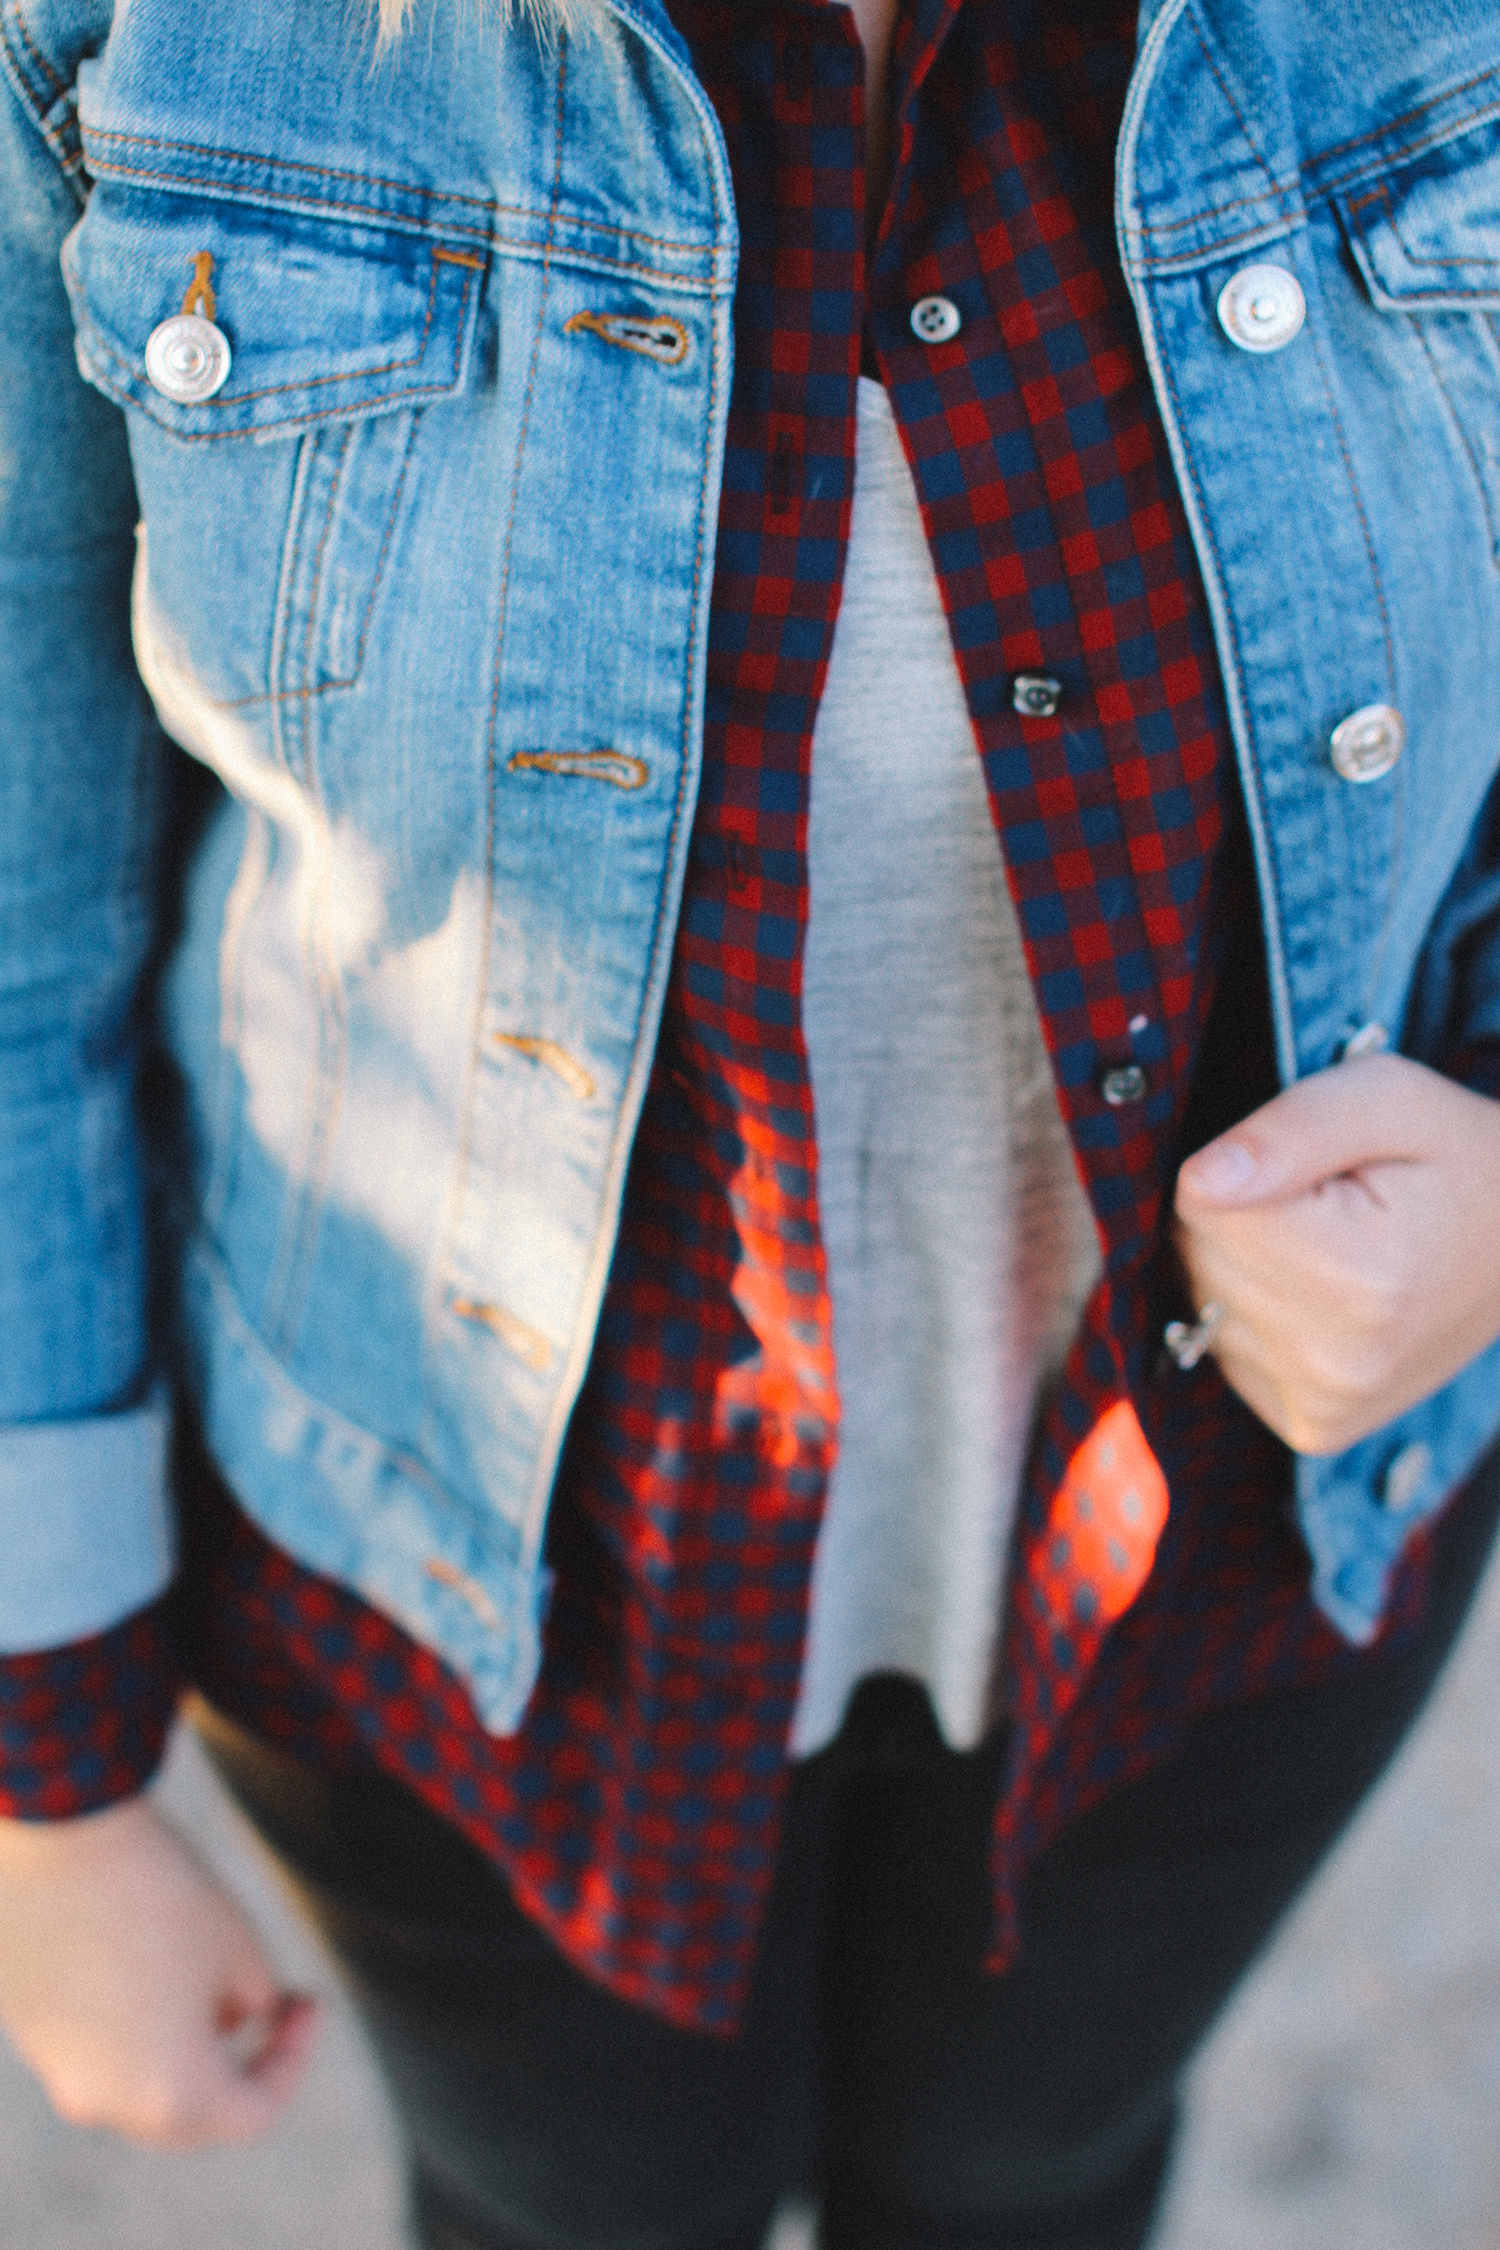 Fall style via chelceytate.com ft @madewell @urbanoutfitters @hm 